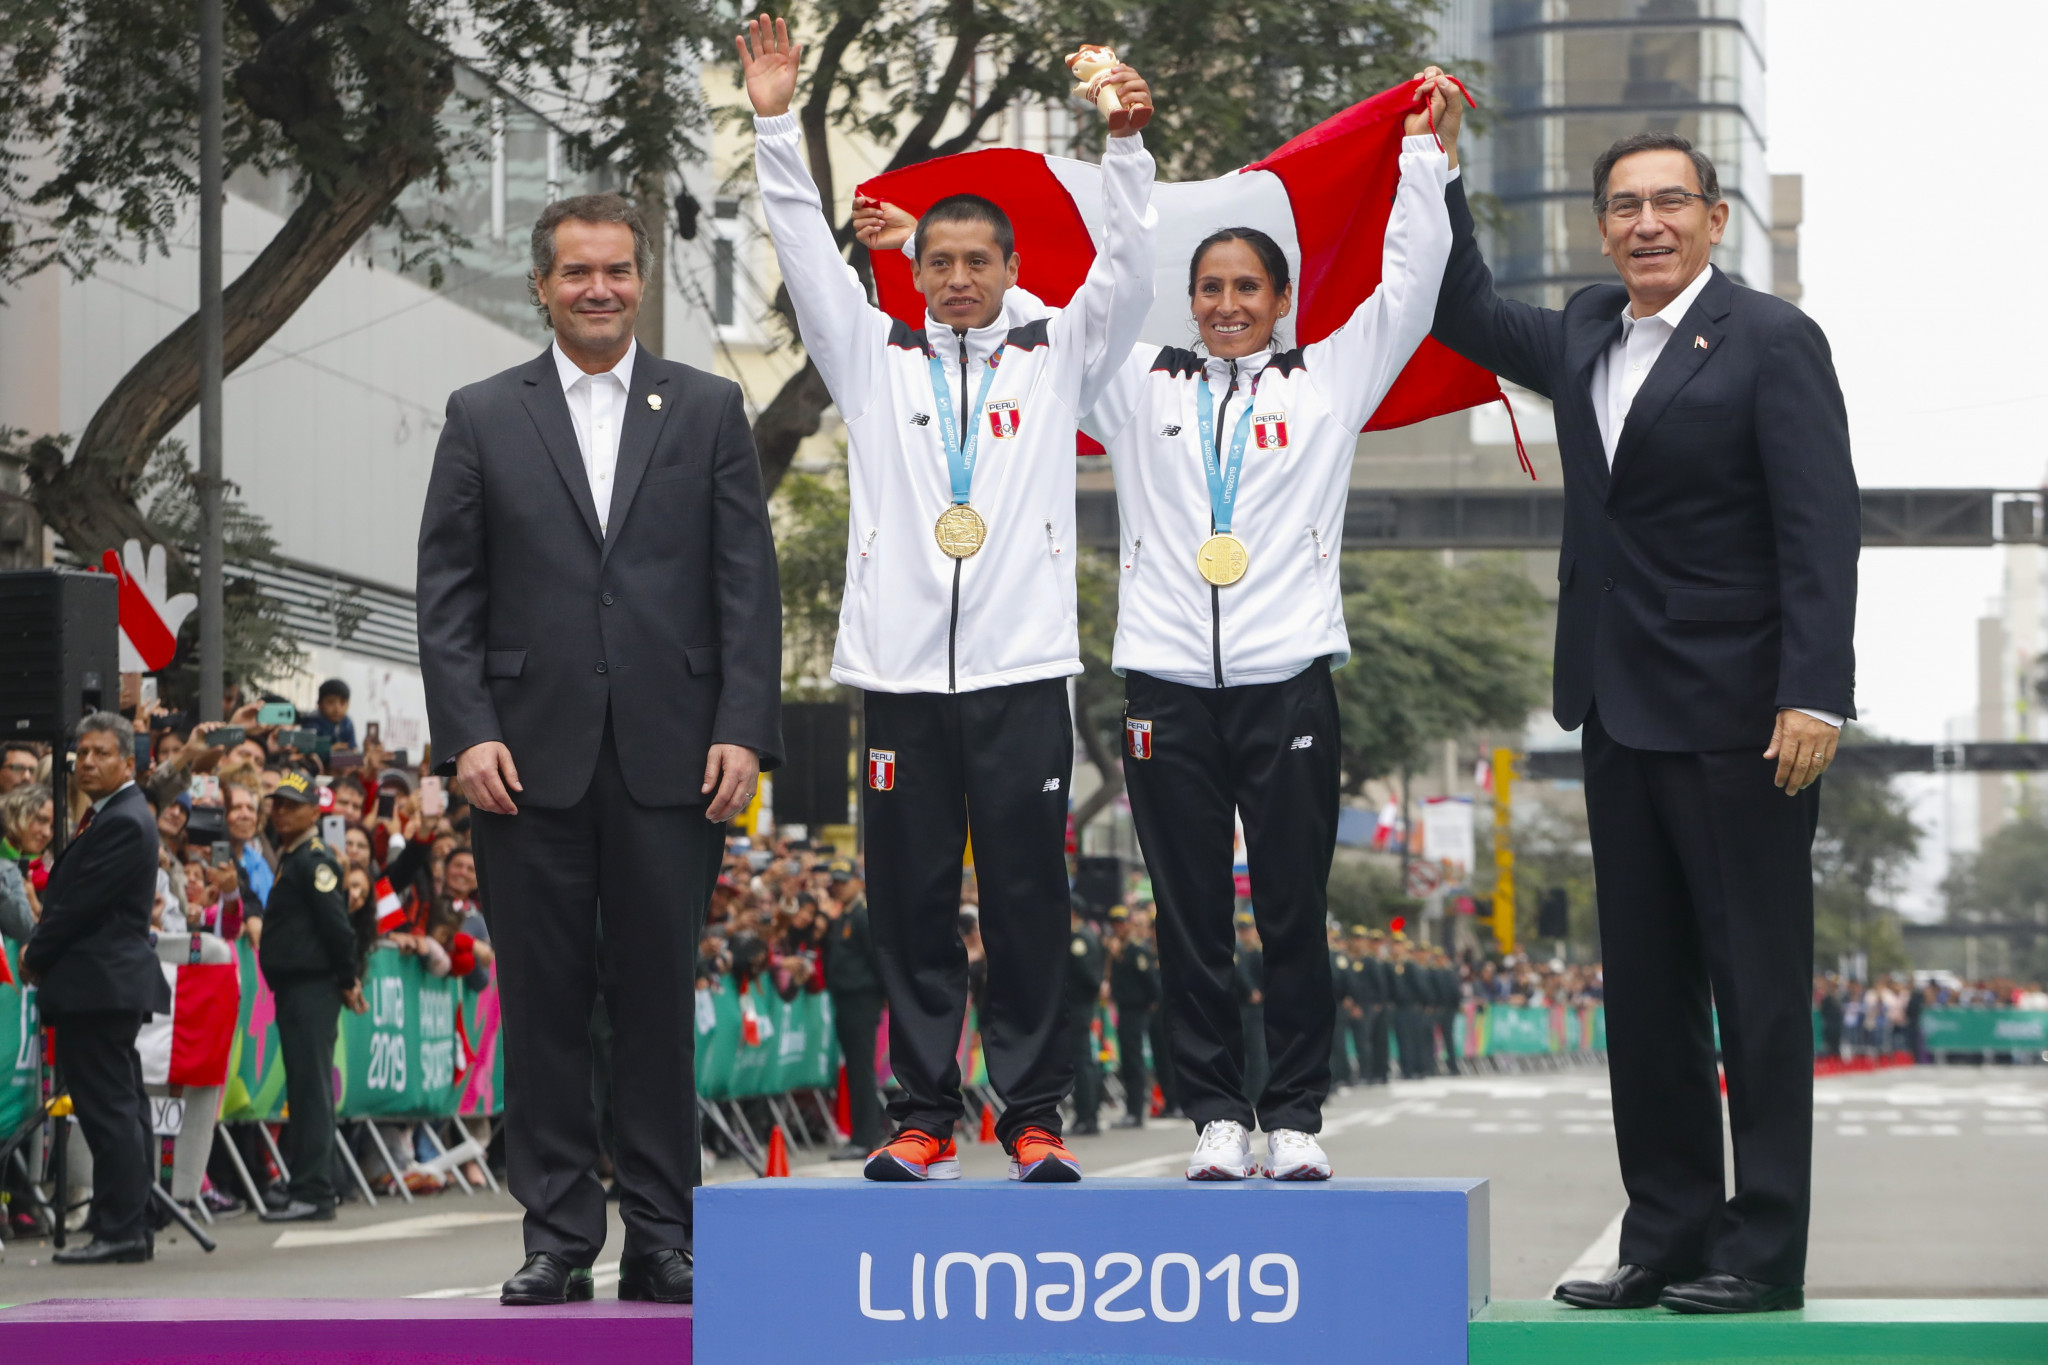 Peru celebrated double gold in the marathons on the first day of the Games ©Getty Images